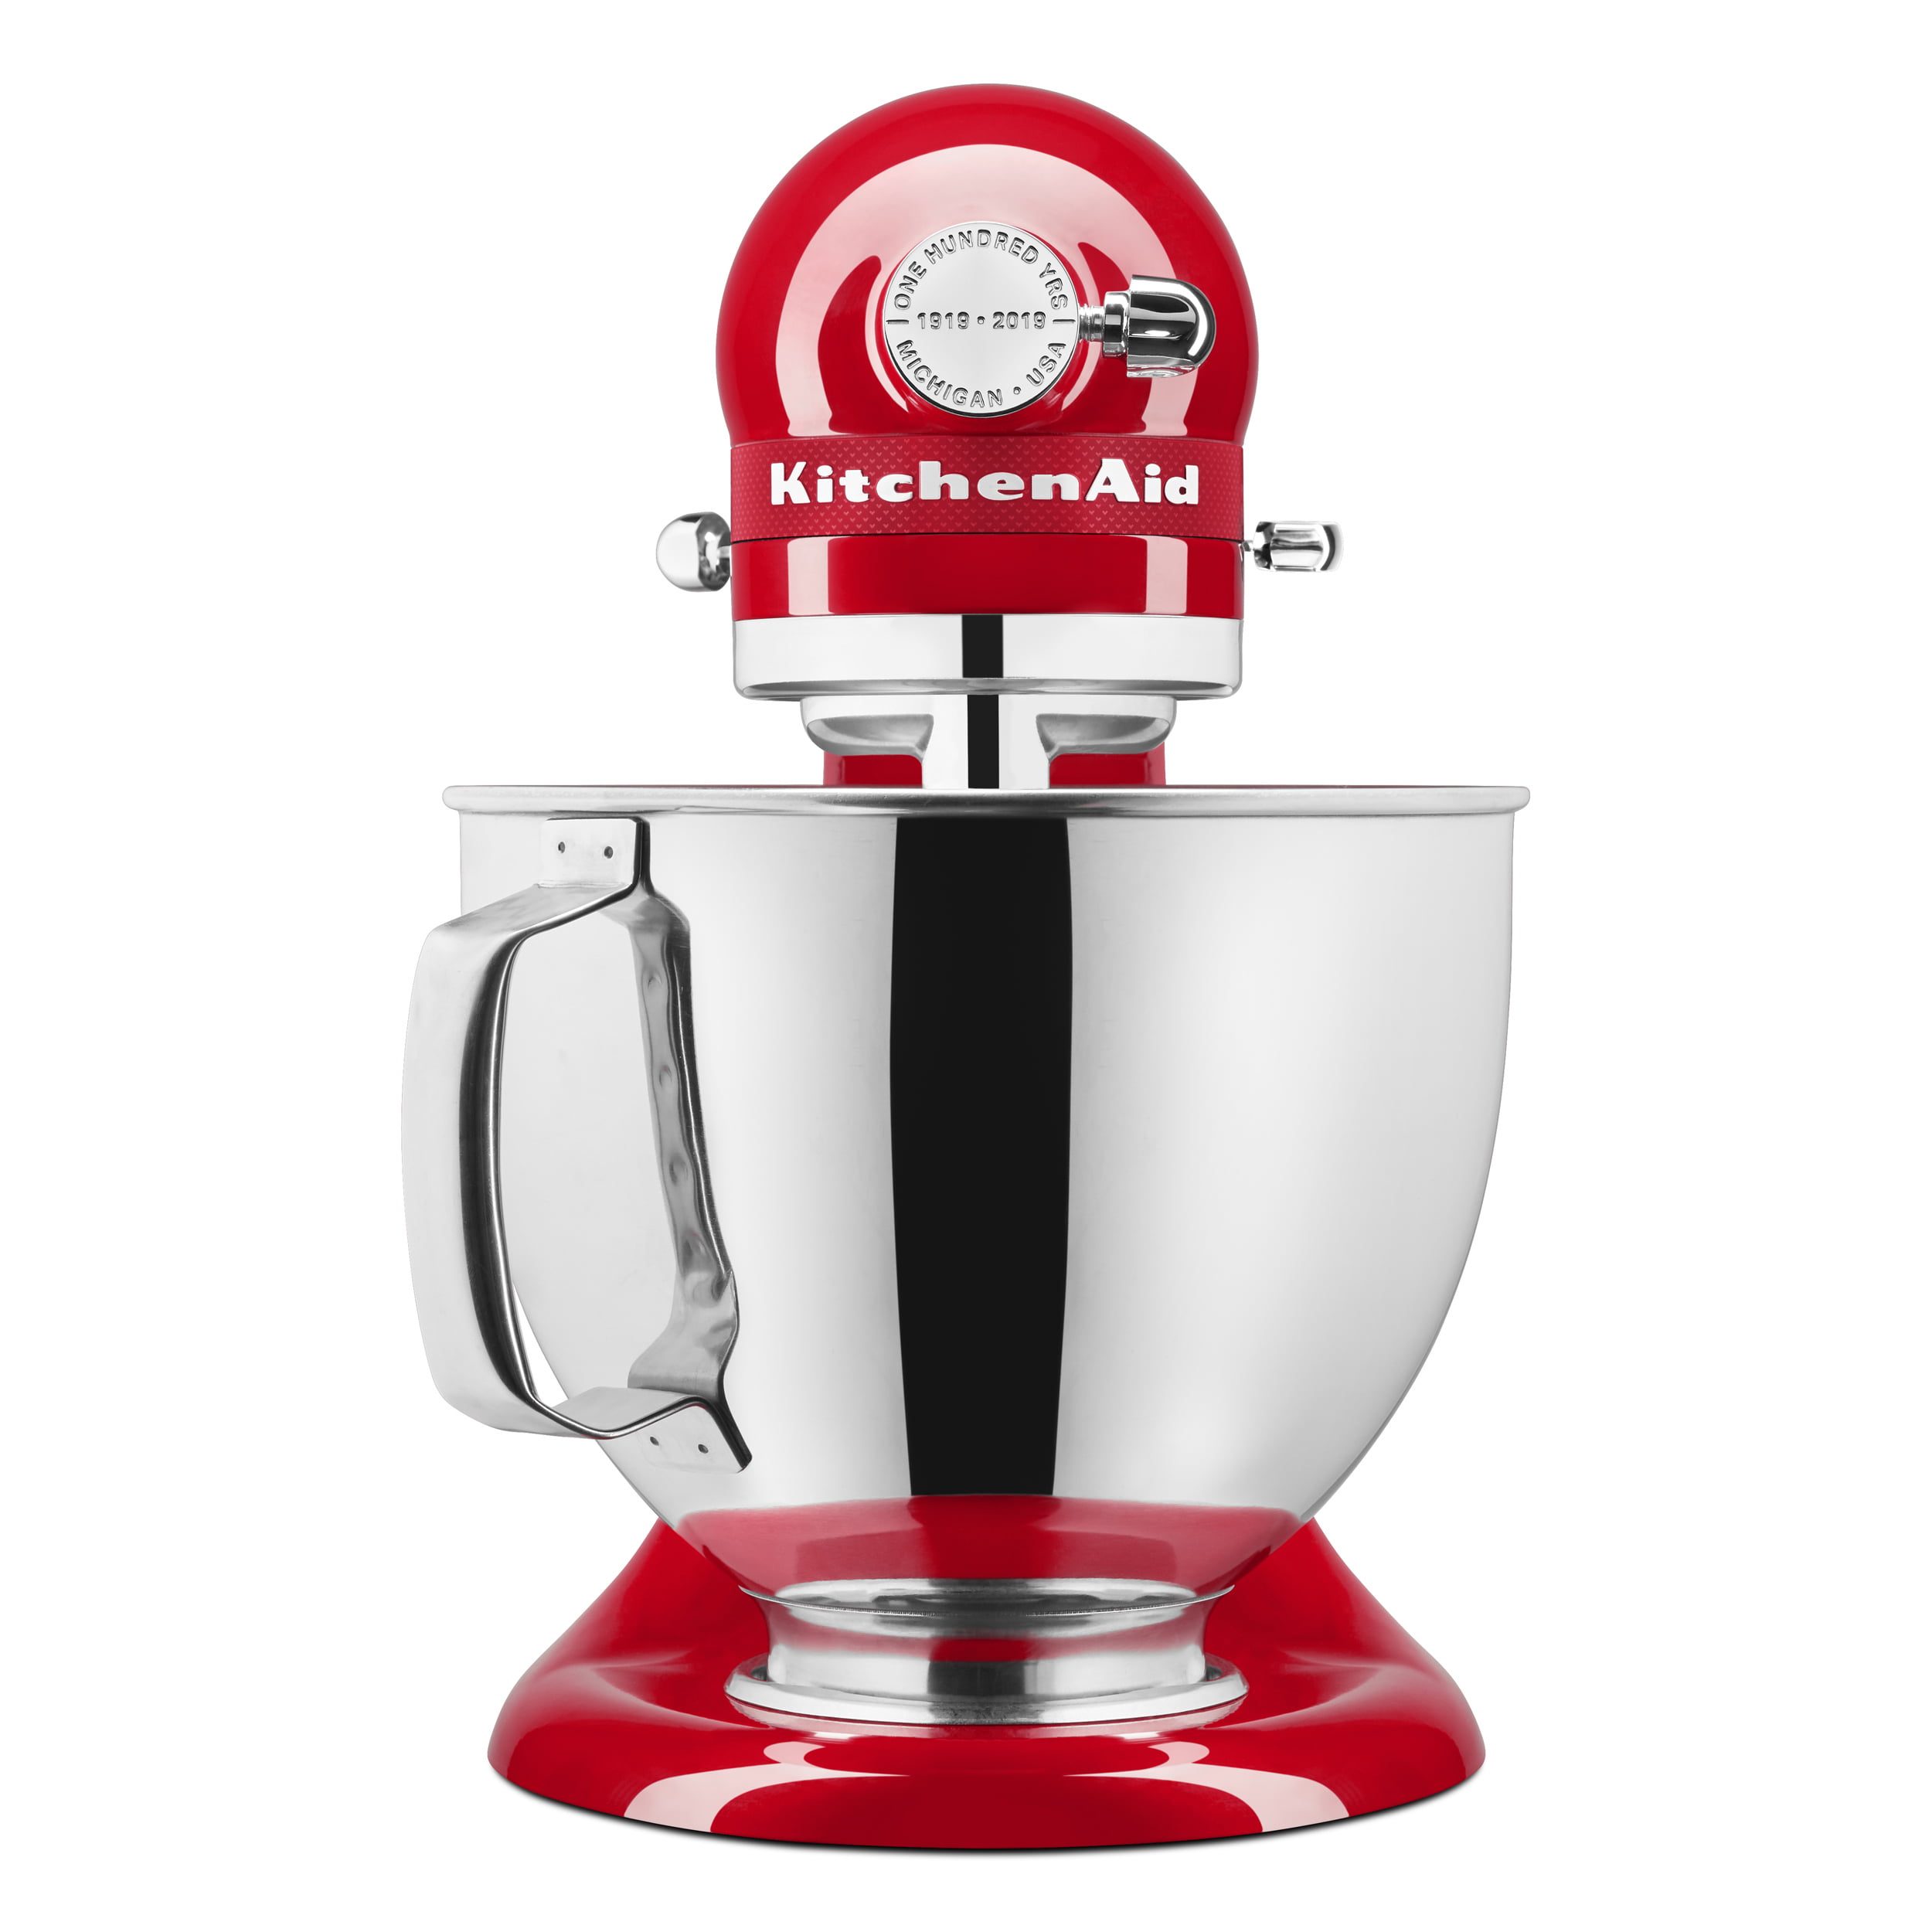 KitchenAid Just Released the Queen of Hearts Appliance Line